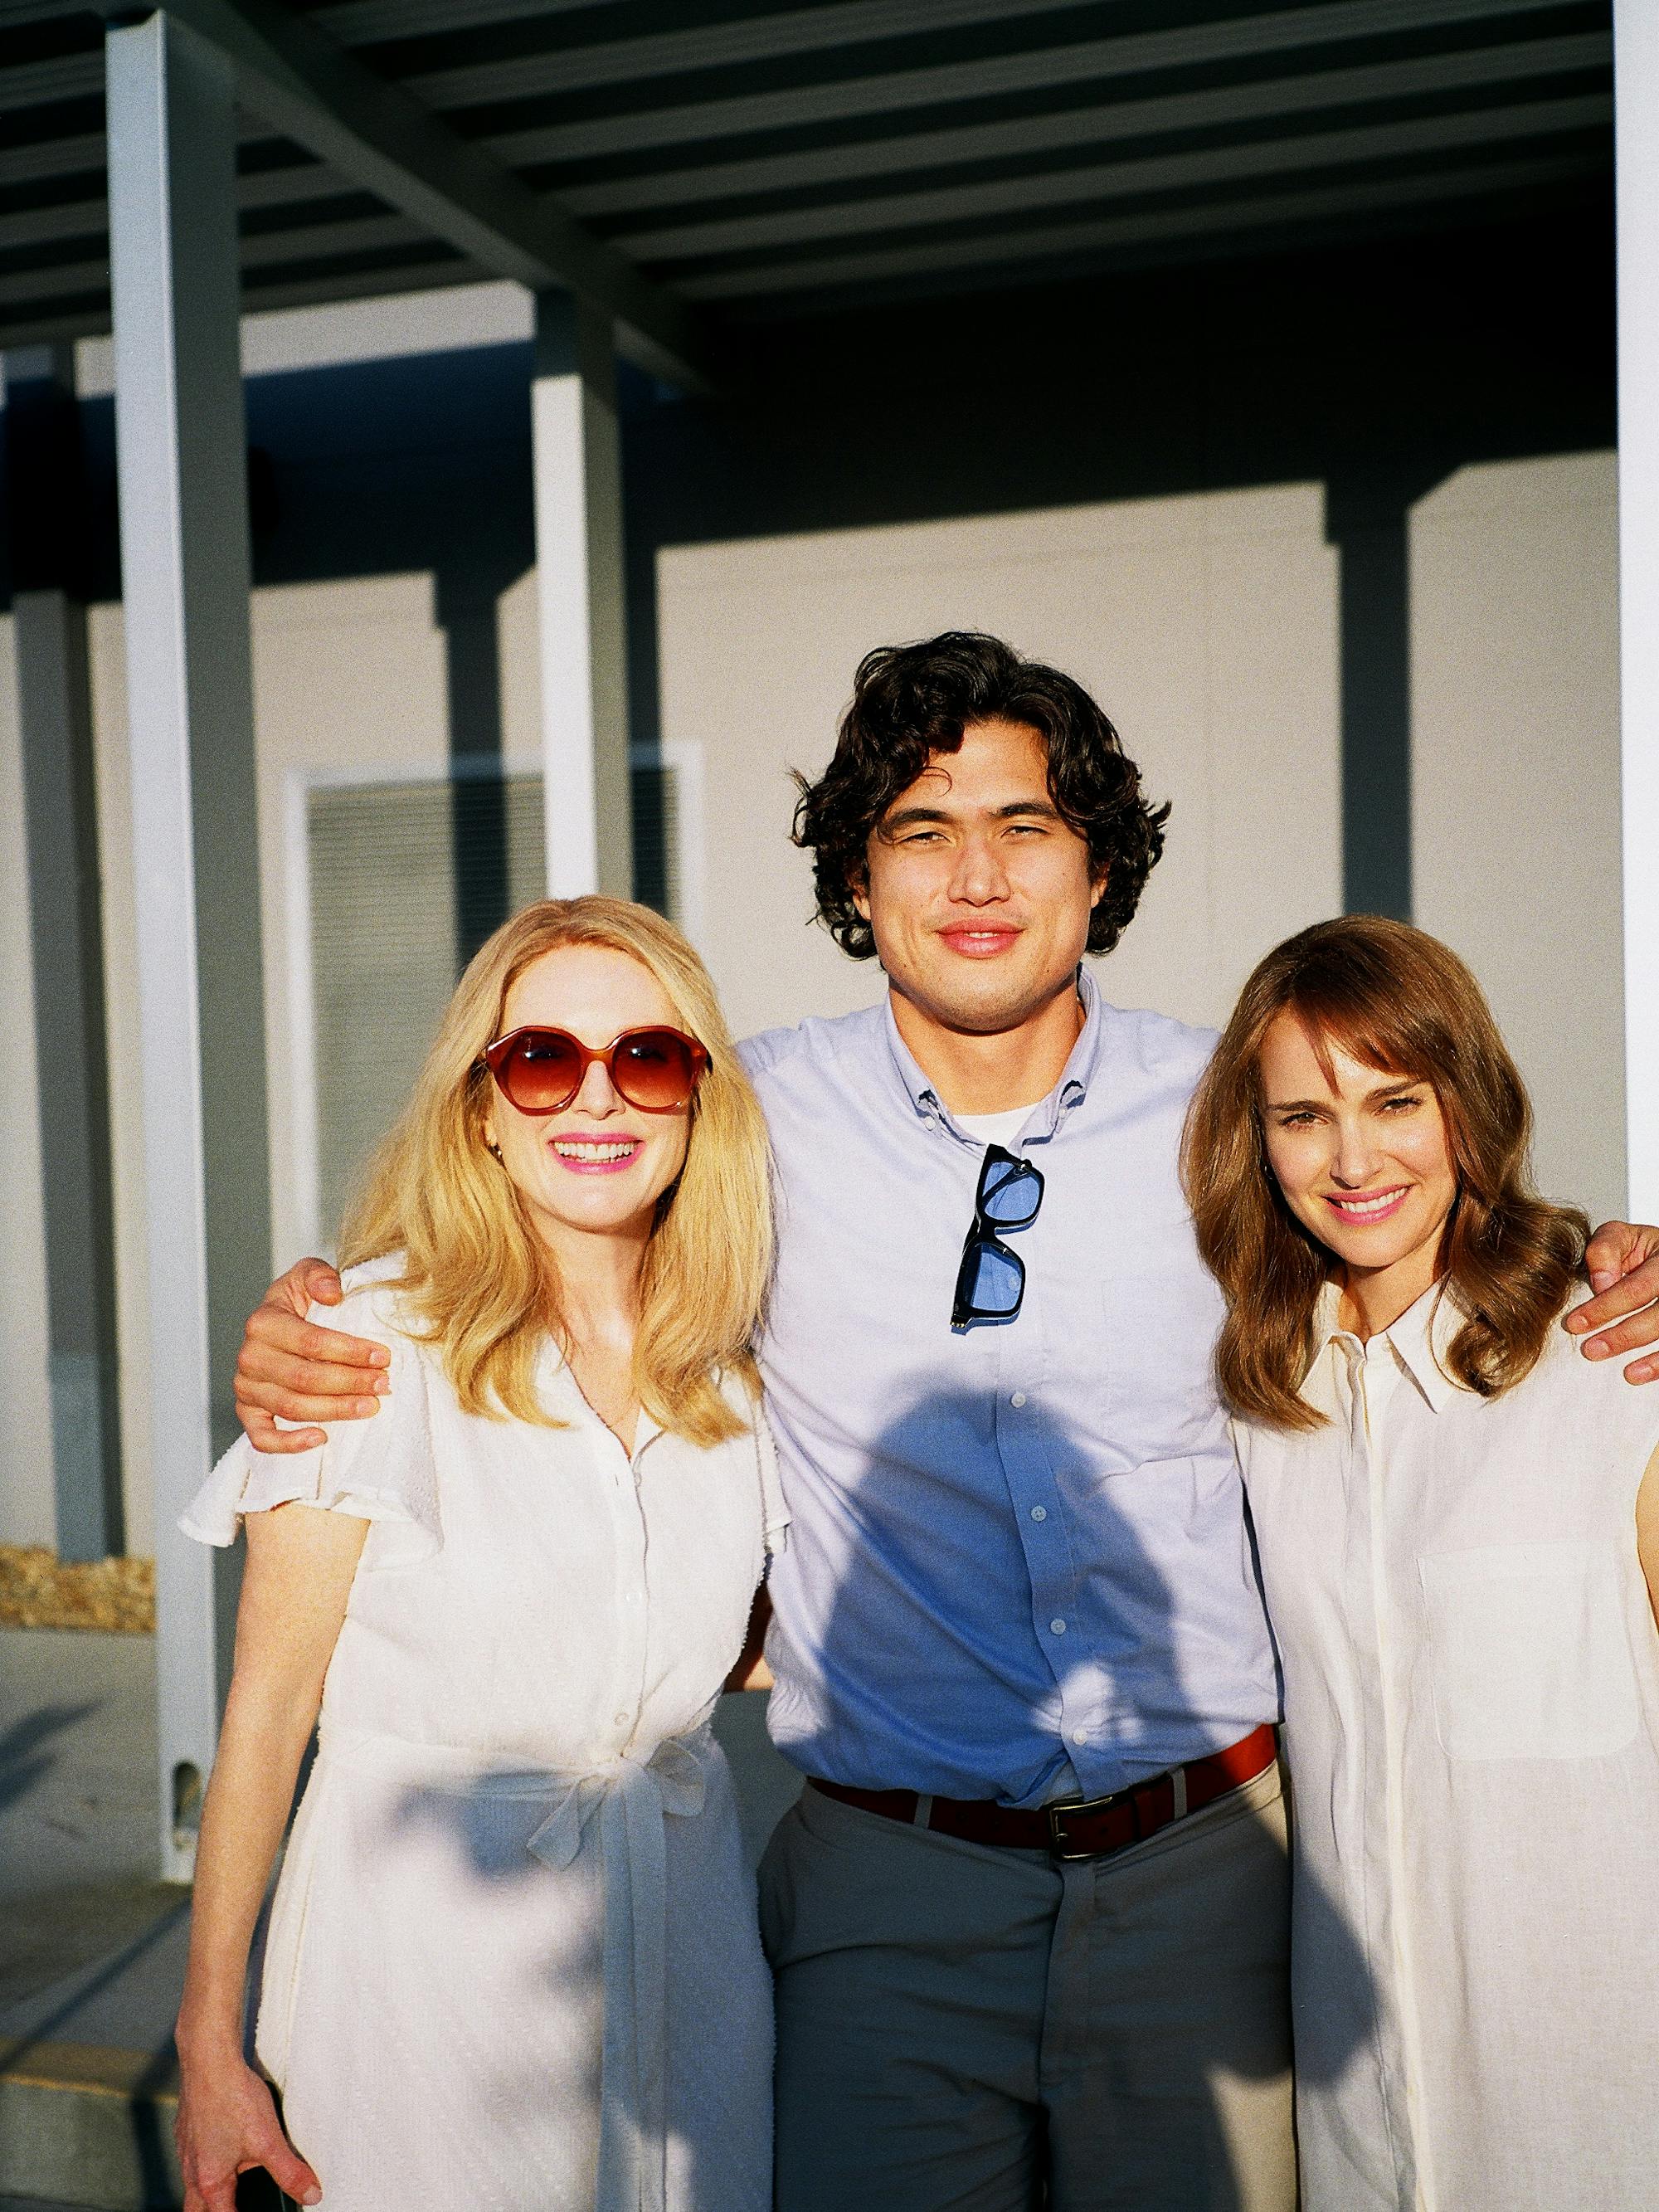 Julianne Moore, Charles Melton, and Natalie Portman stand together in a sunny shot.